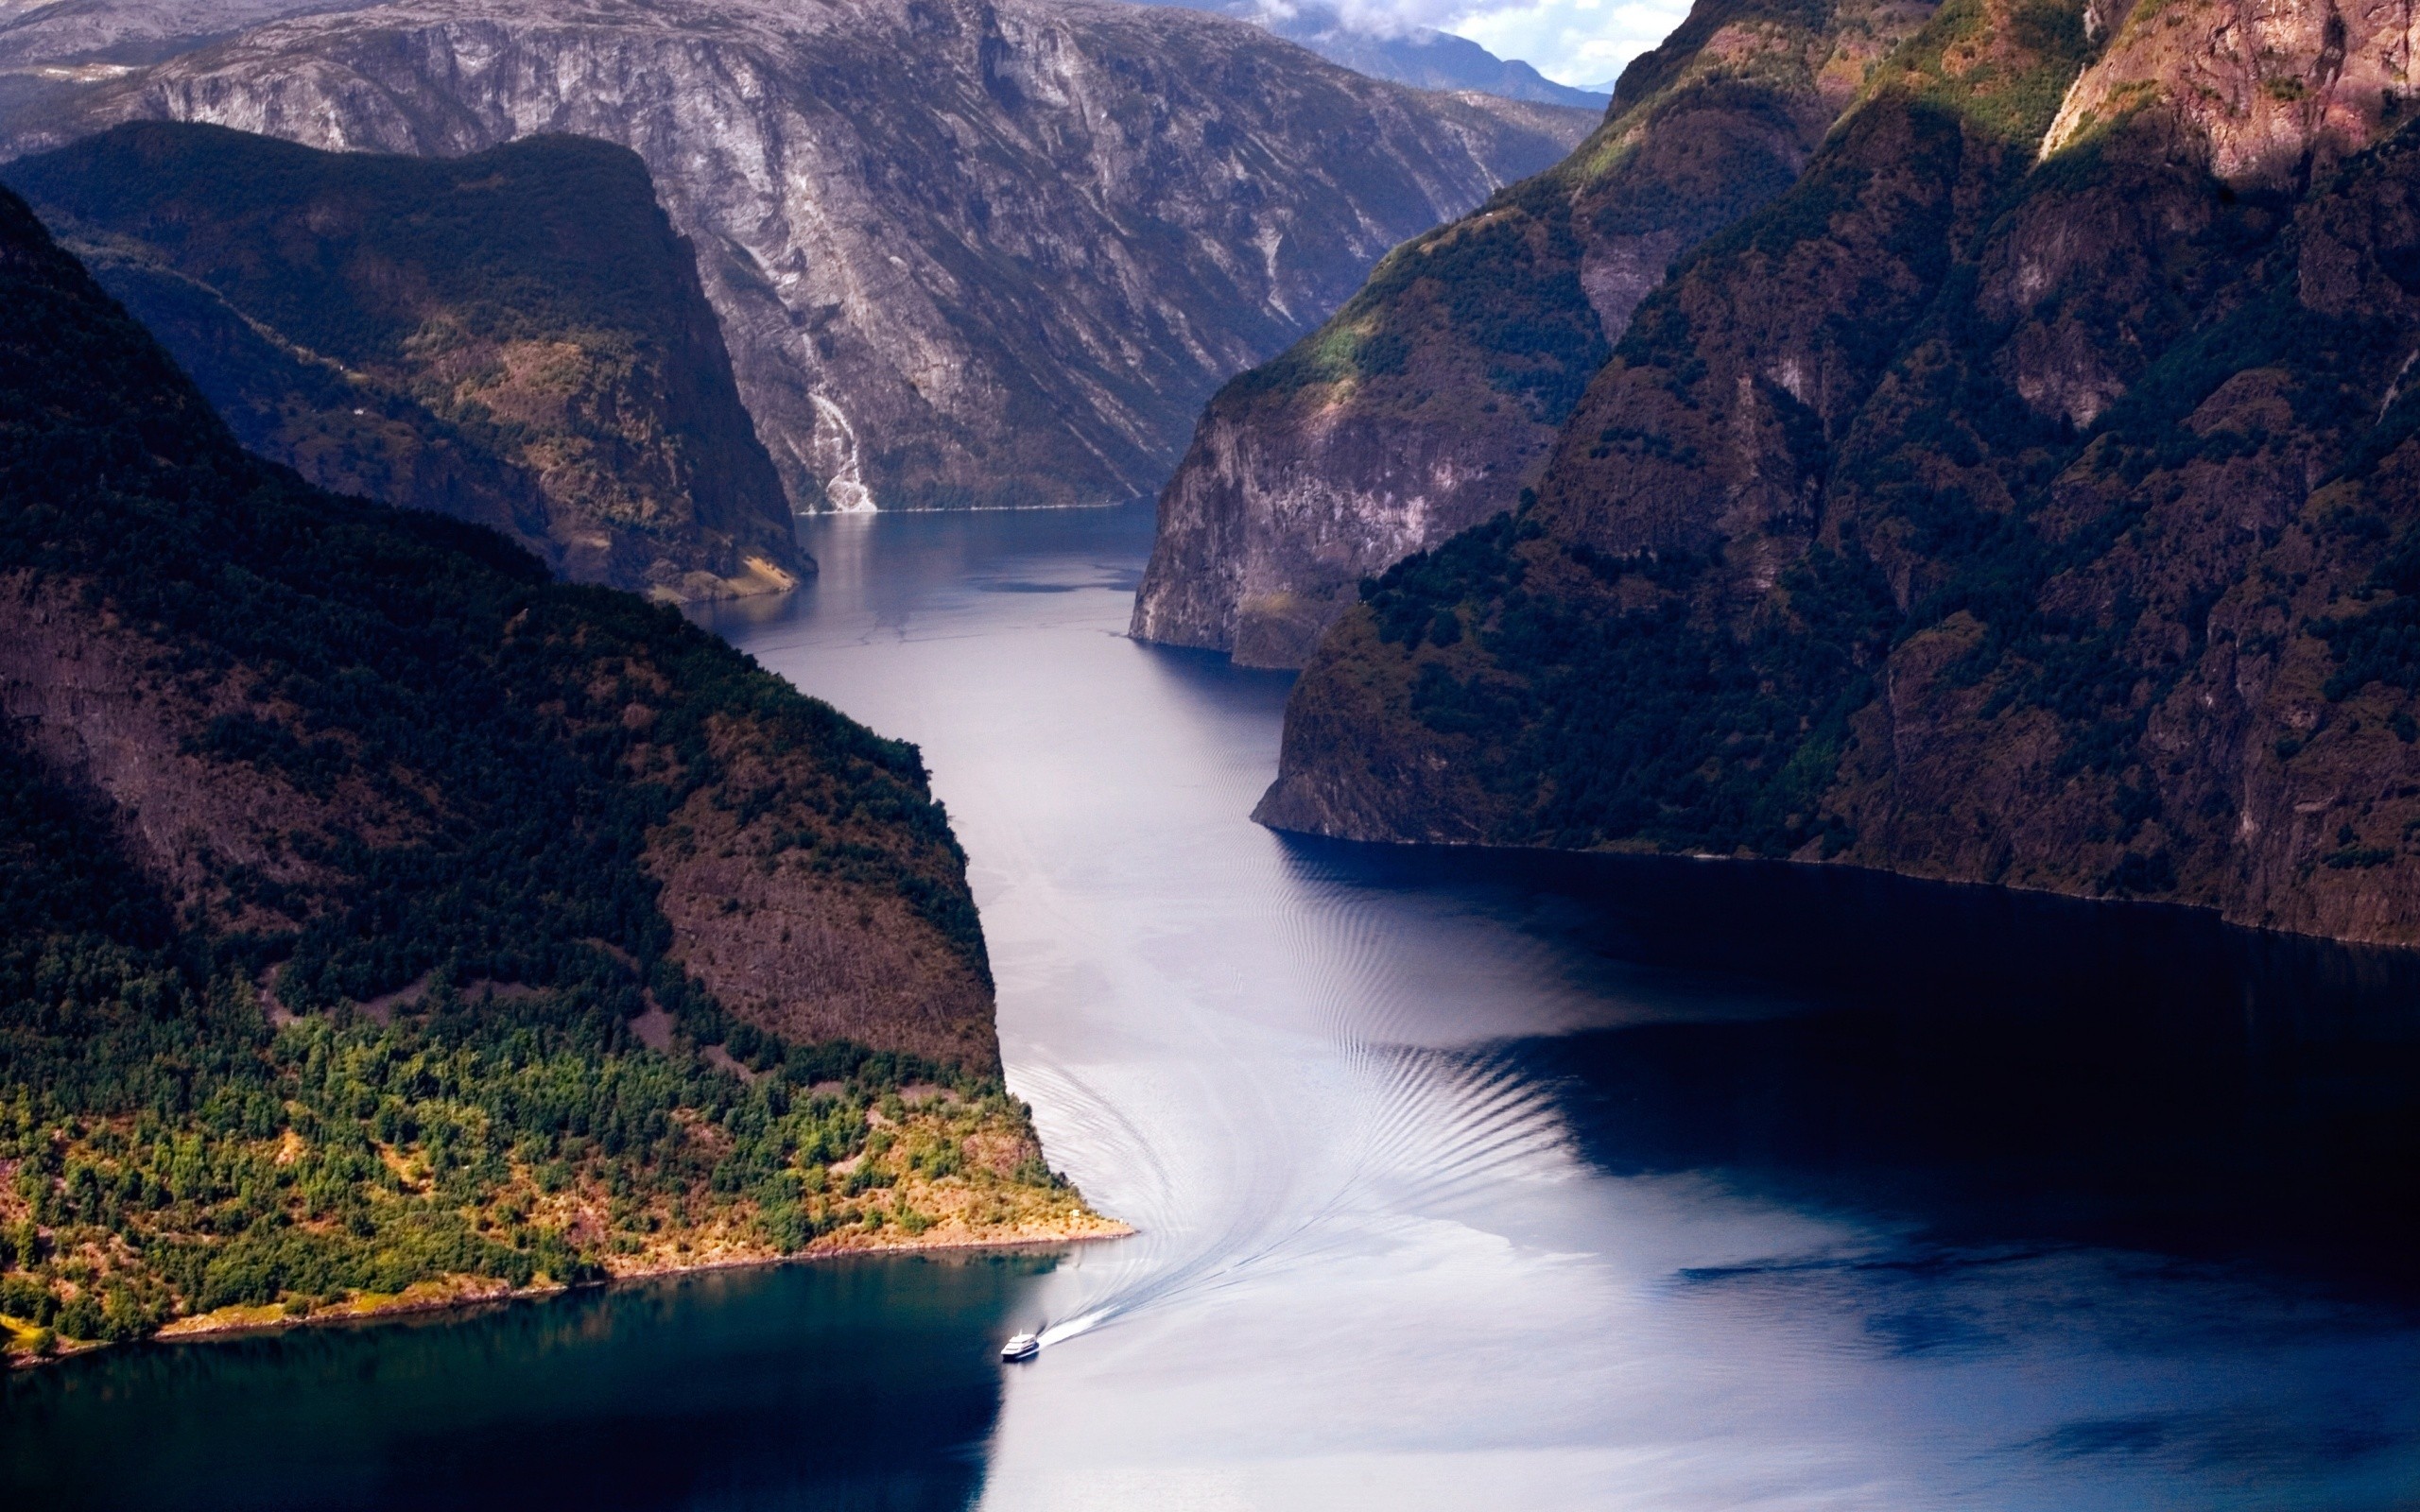 General 2560x1600 nature Norway mountains landscape water fjord